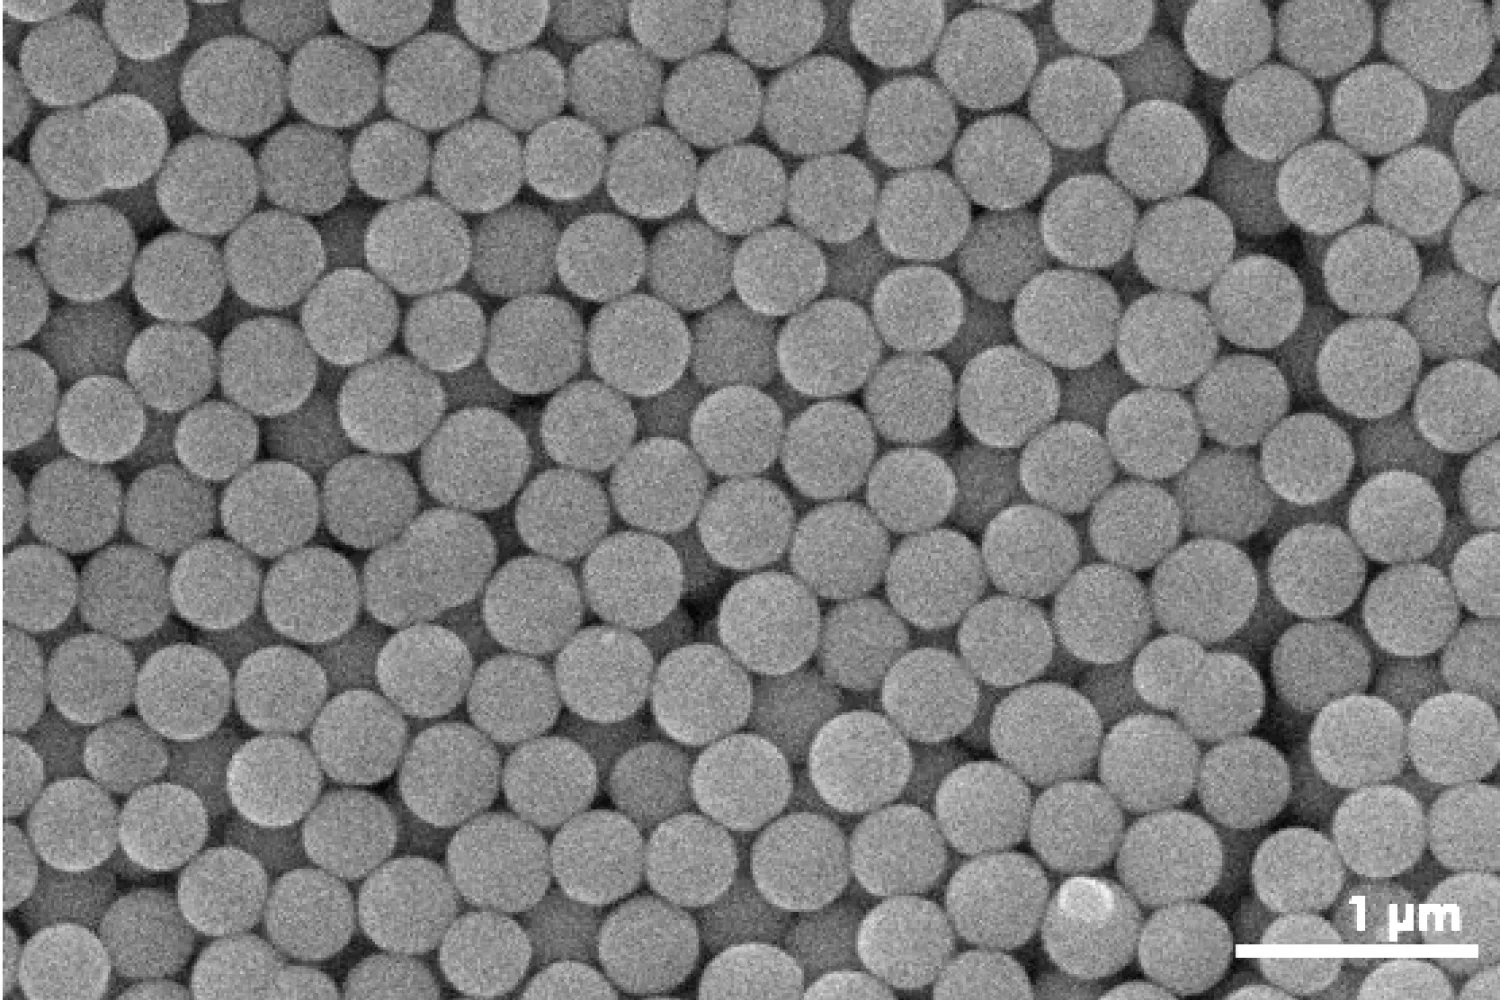 Scanning Electron Microscope image of colloidal particles